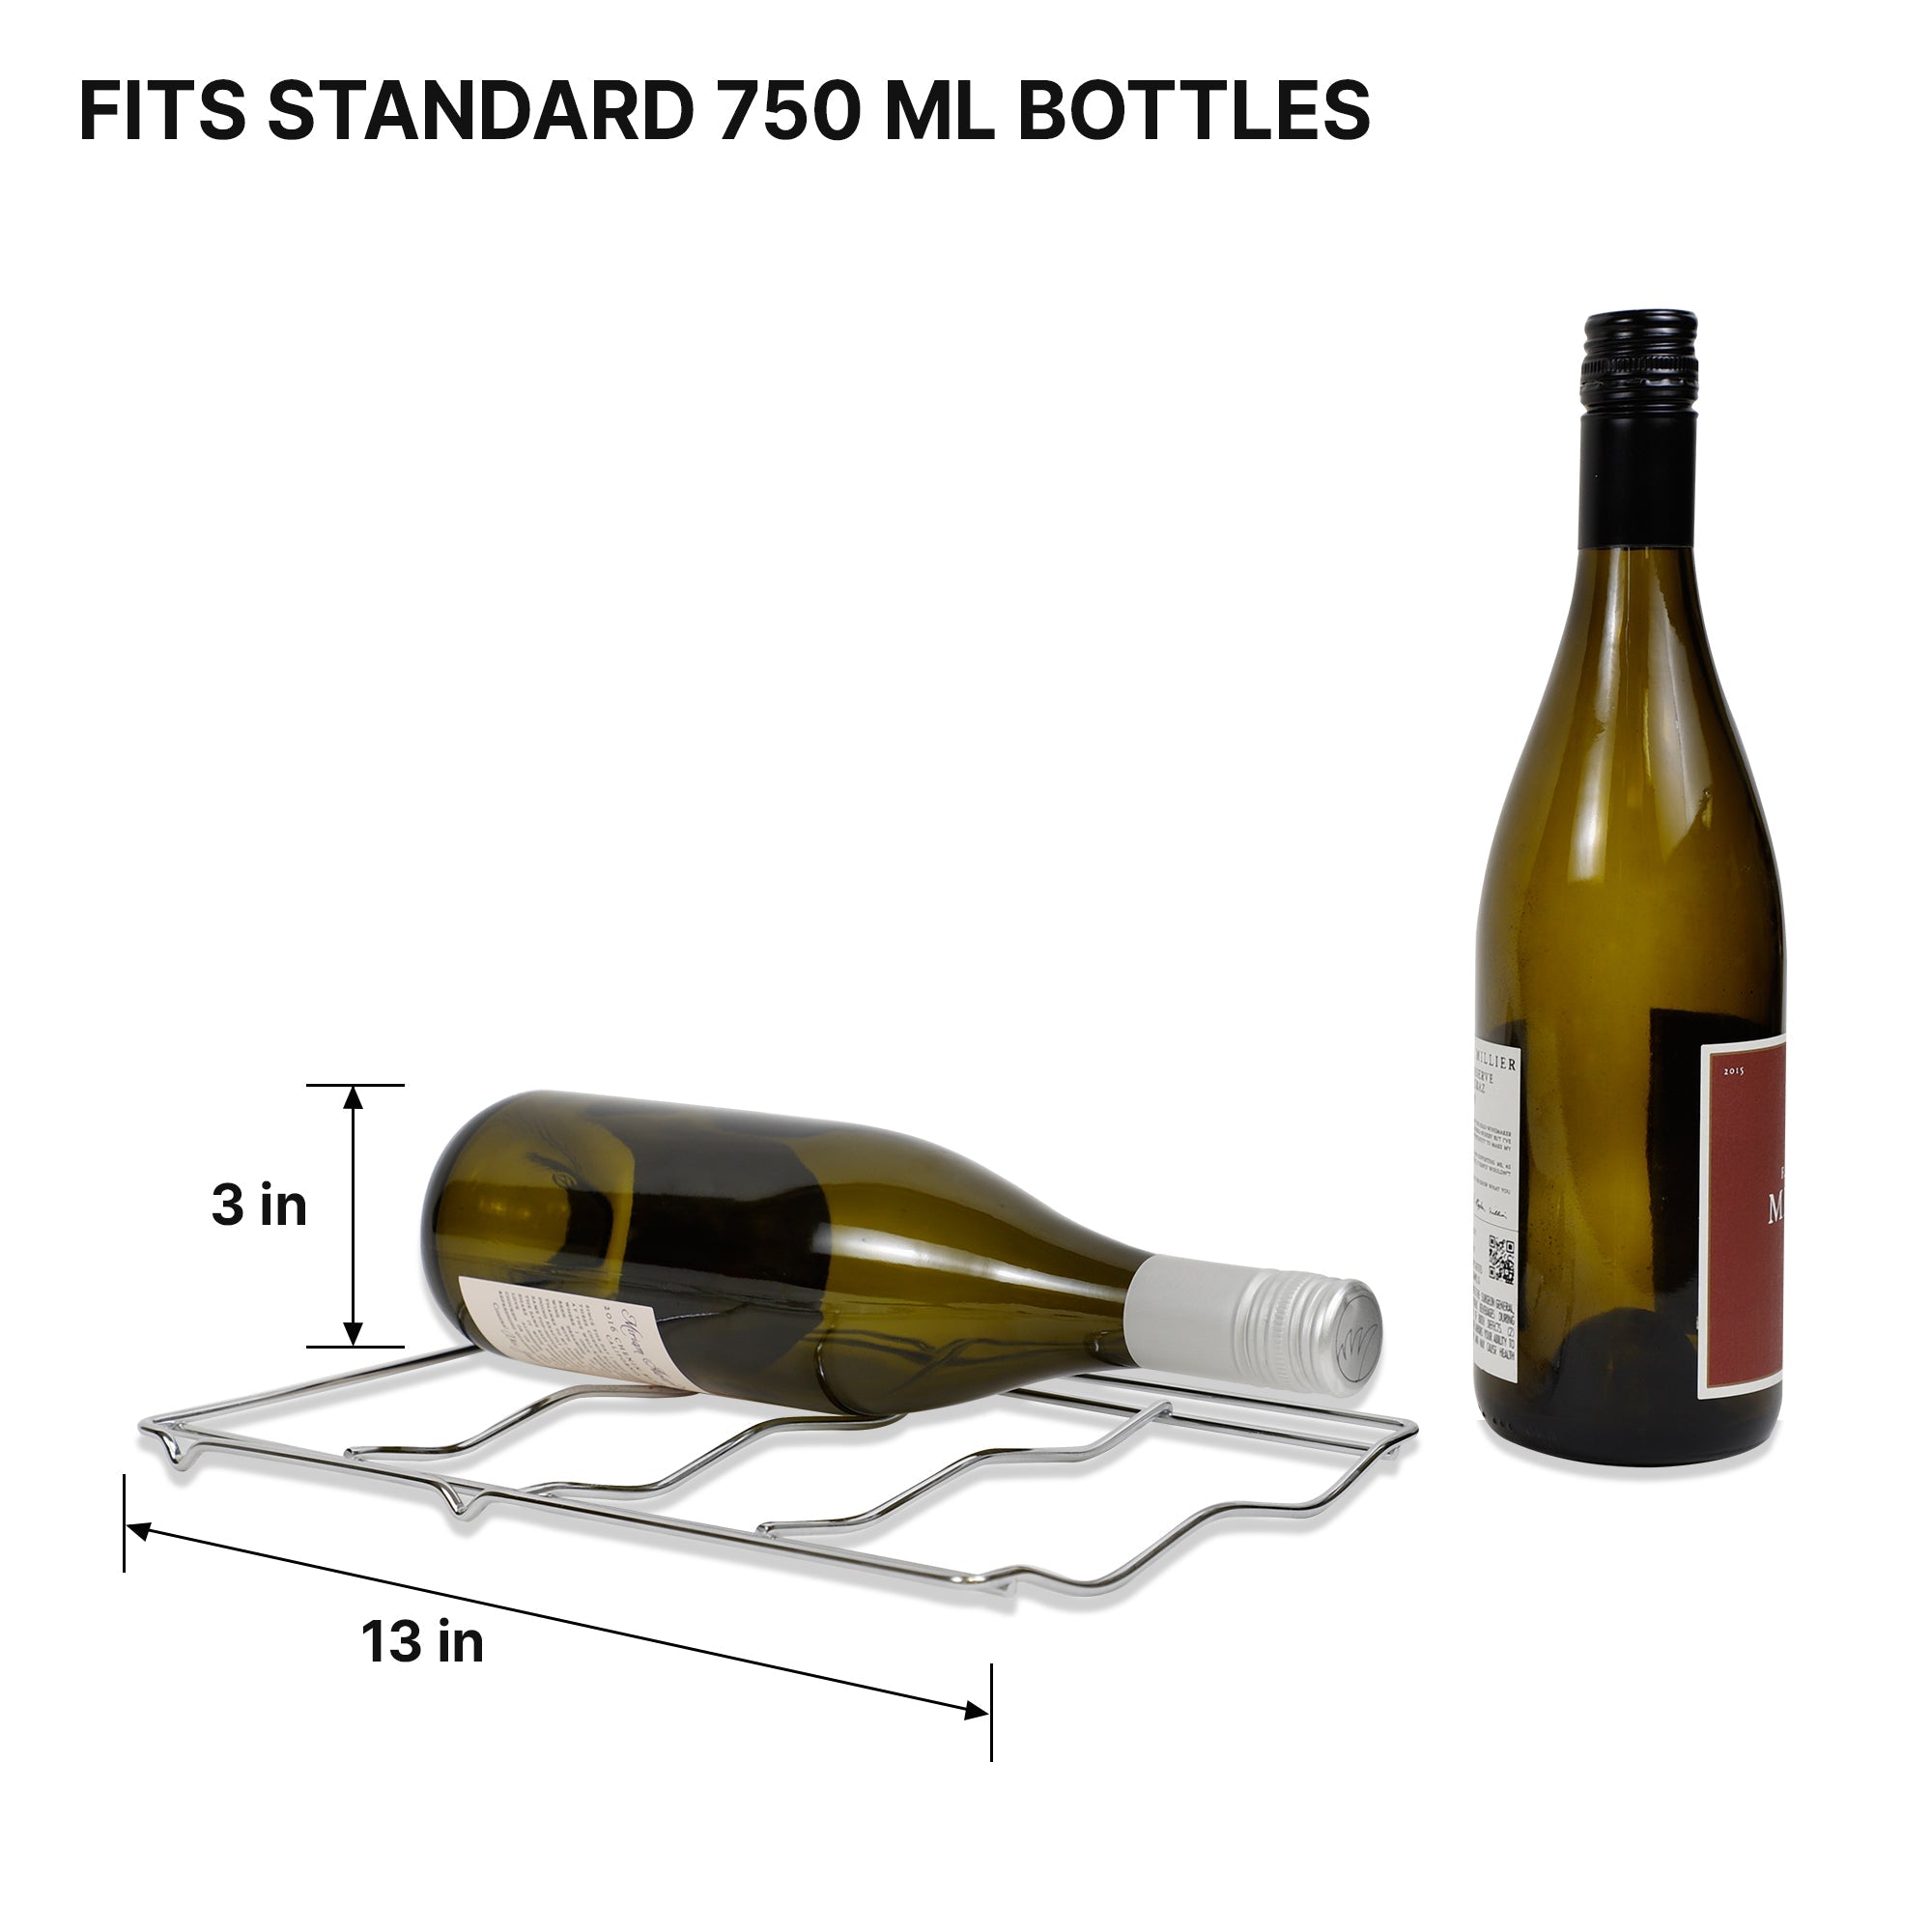 Removable wire rack from Koolatron 18 bottle wine chiller with dimensions labeled and one wine bottle lying on it and one standing up beside it. Text above reads "Fits standard 750 mL bottles"